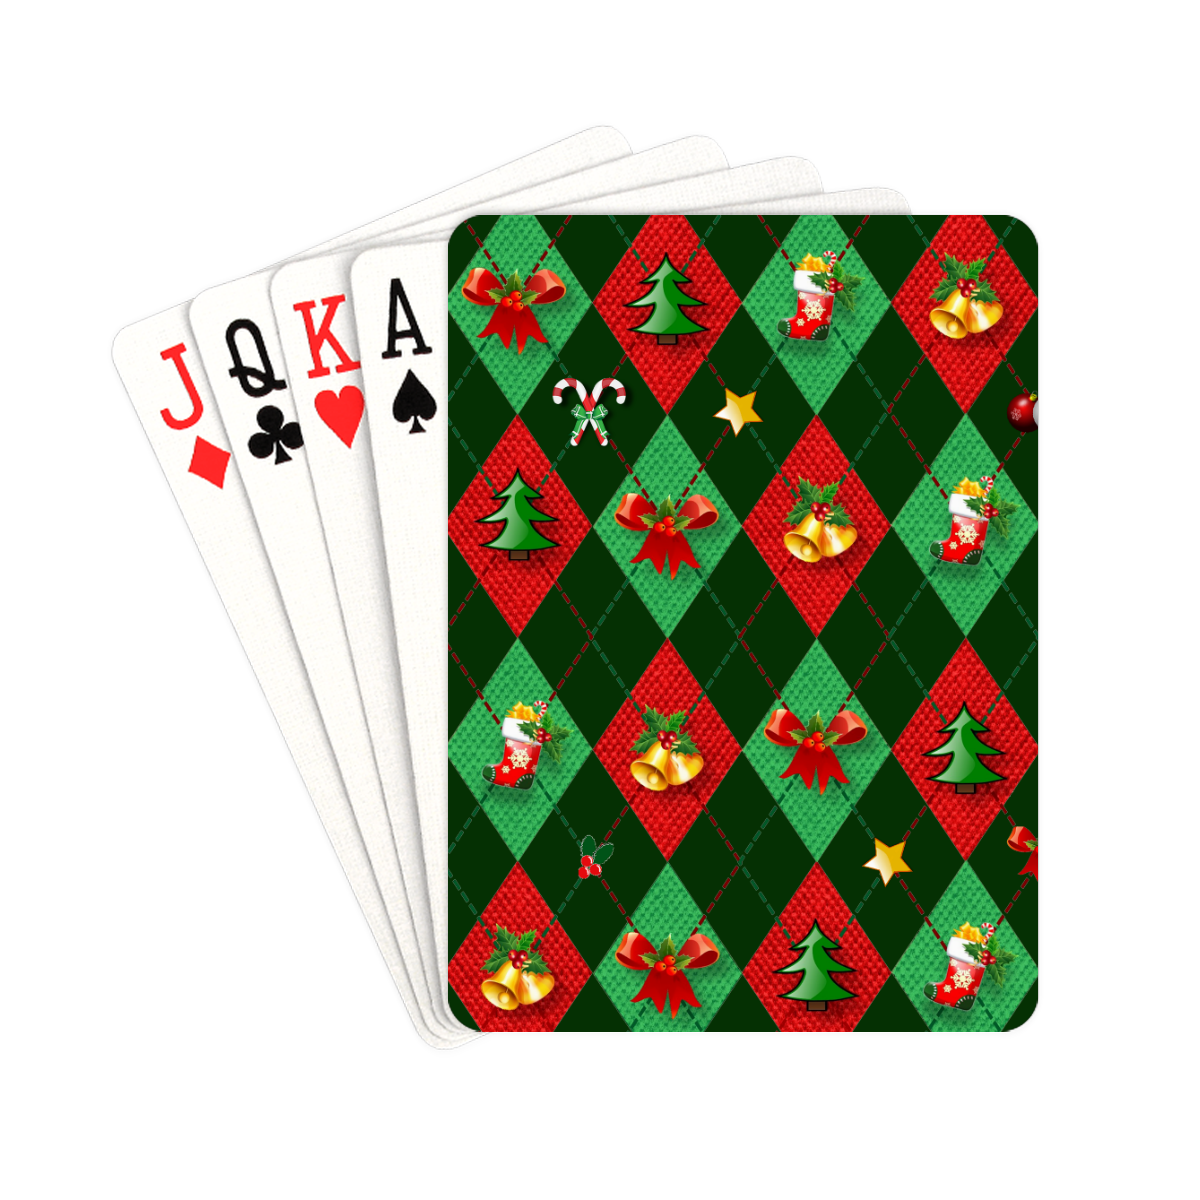 Christmas Argyle Ugly Sweater Pattern on Green Playing Cards 2.5"x3.5"